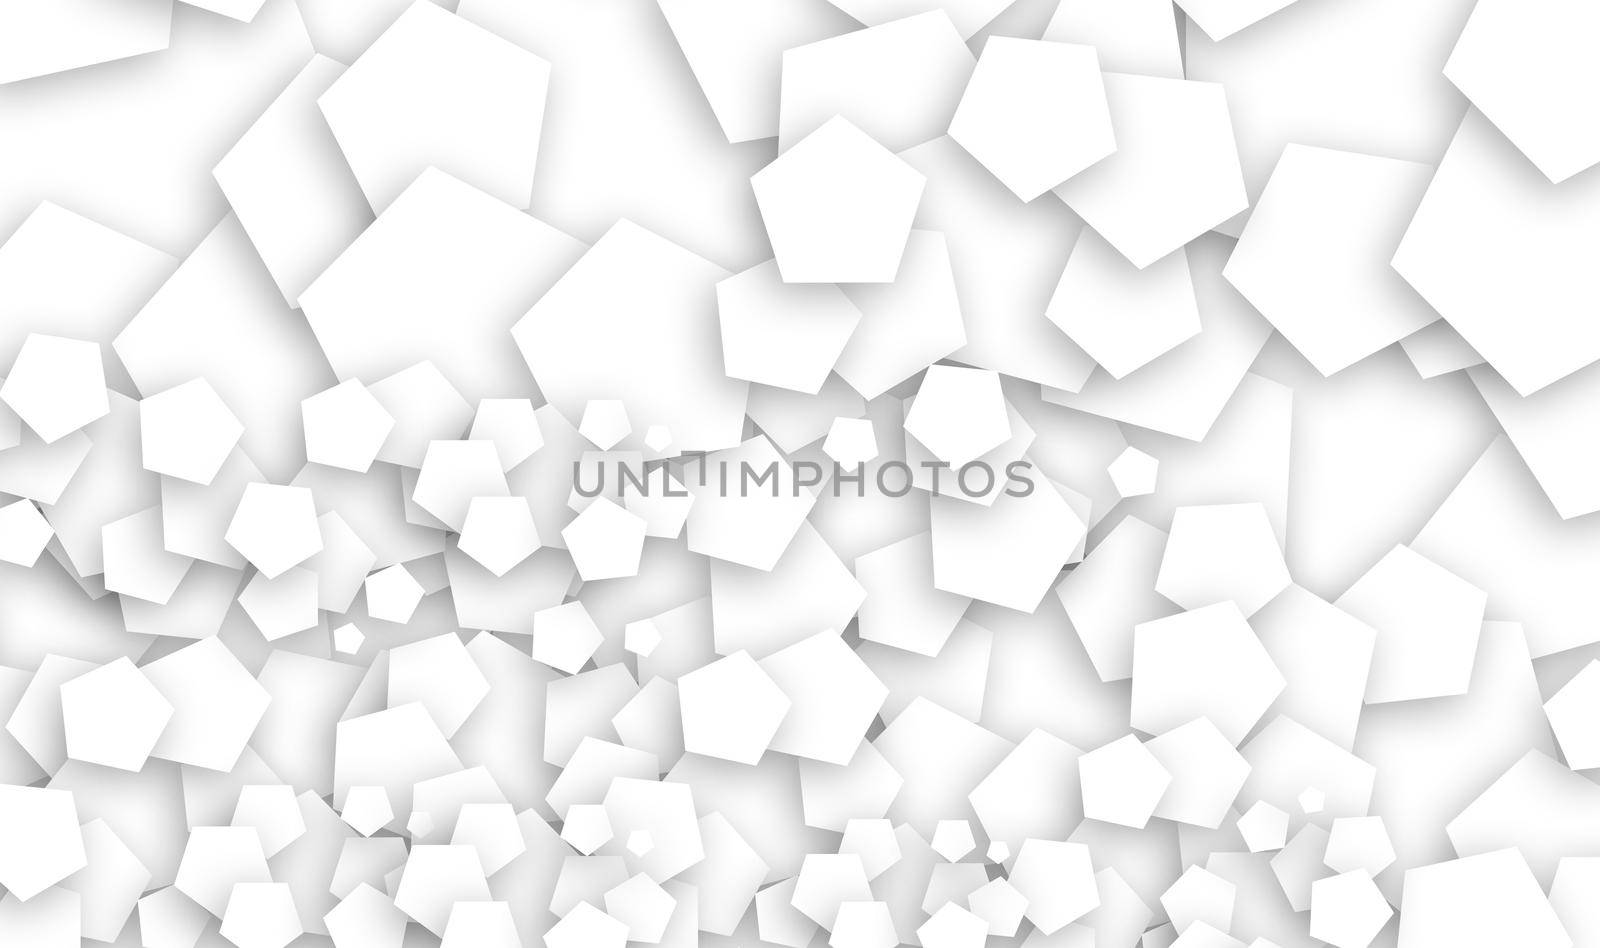 Pentagon fractal design stock photo Pentagon - Shape, Abstract, Backgrounds, Black And White, Fractal by tabishere